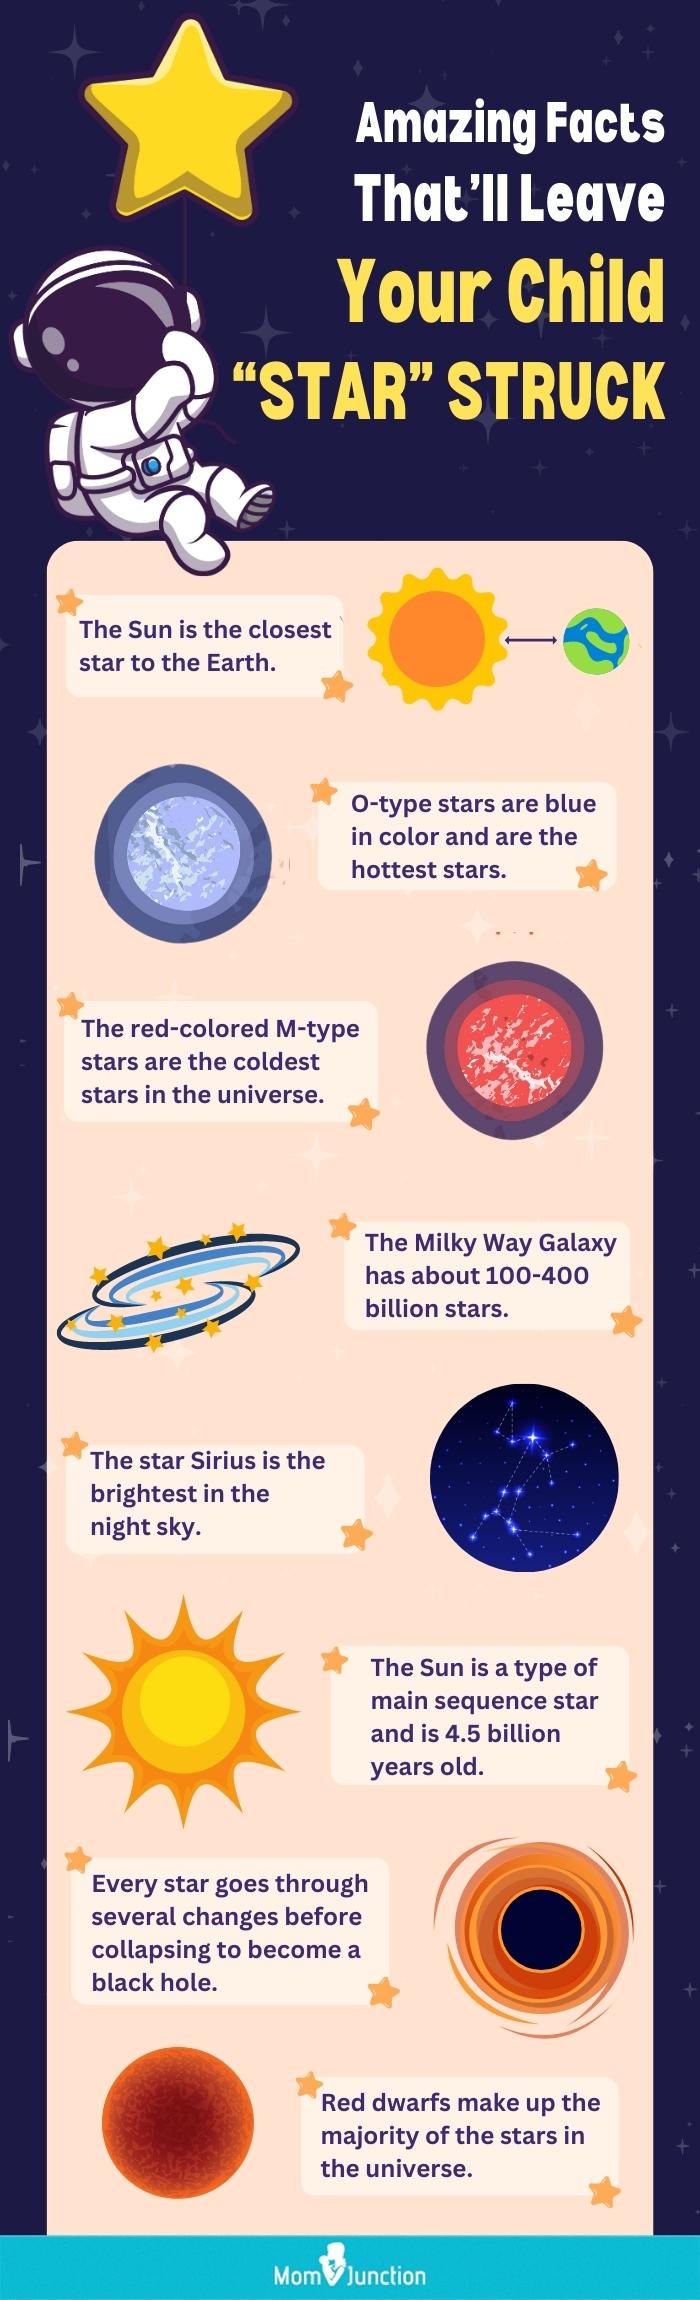 amazing facts that’ll leave your child star struck (infographic)